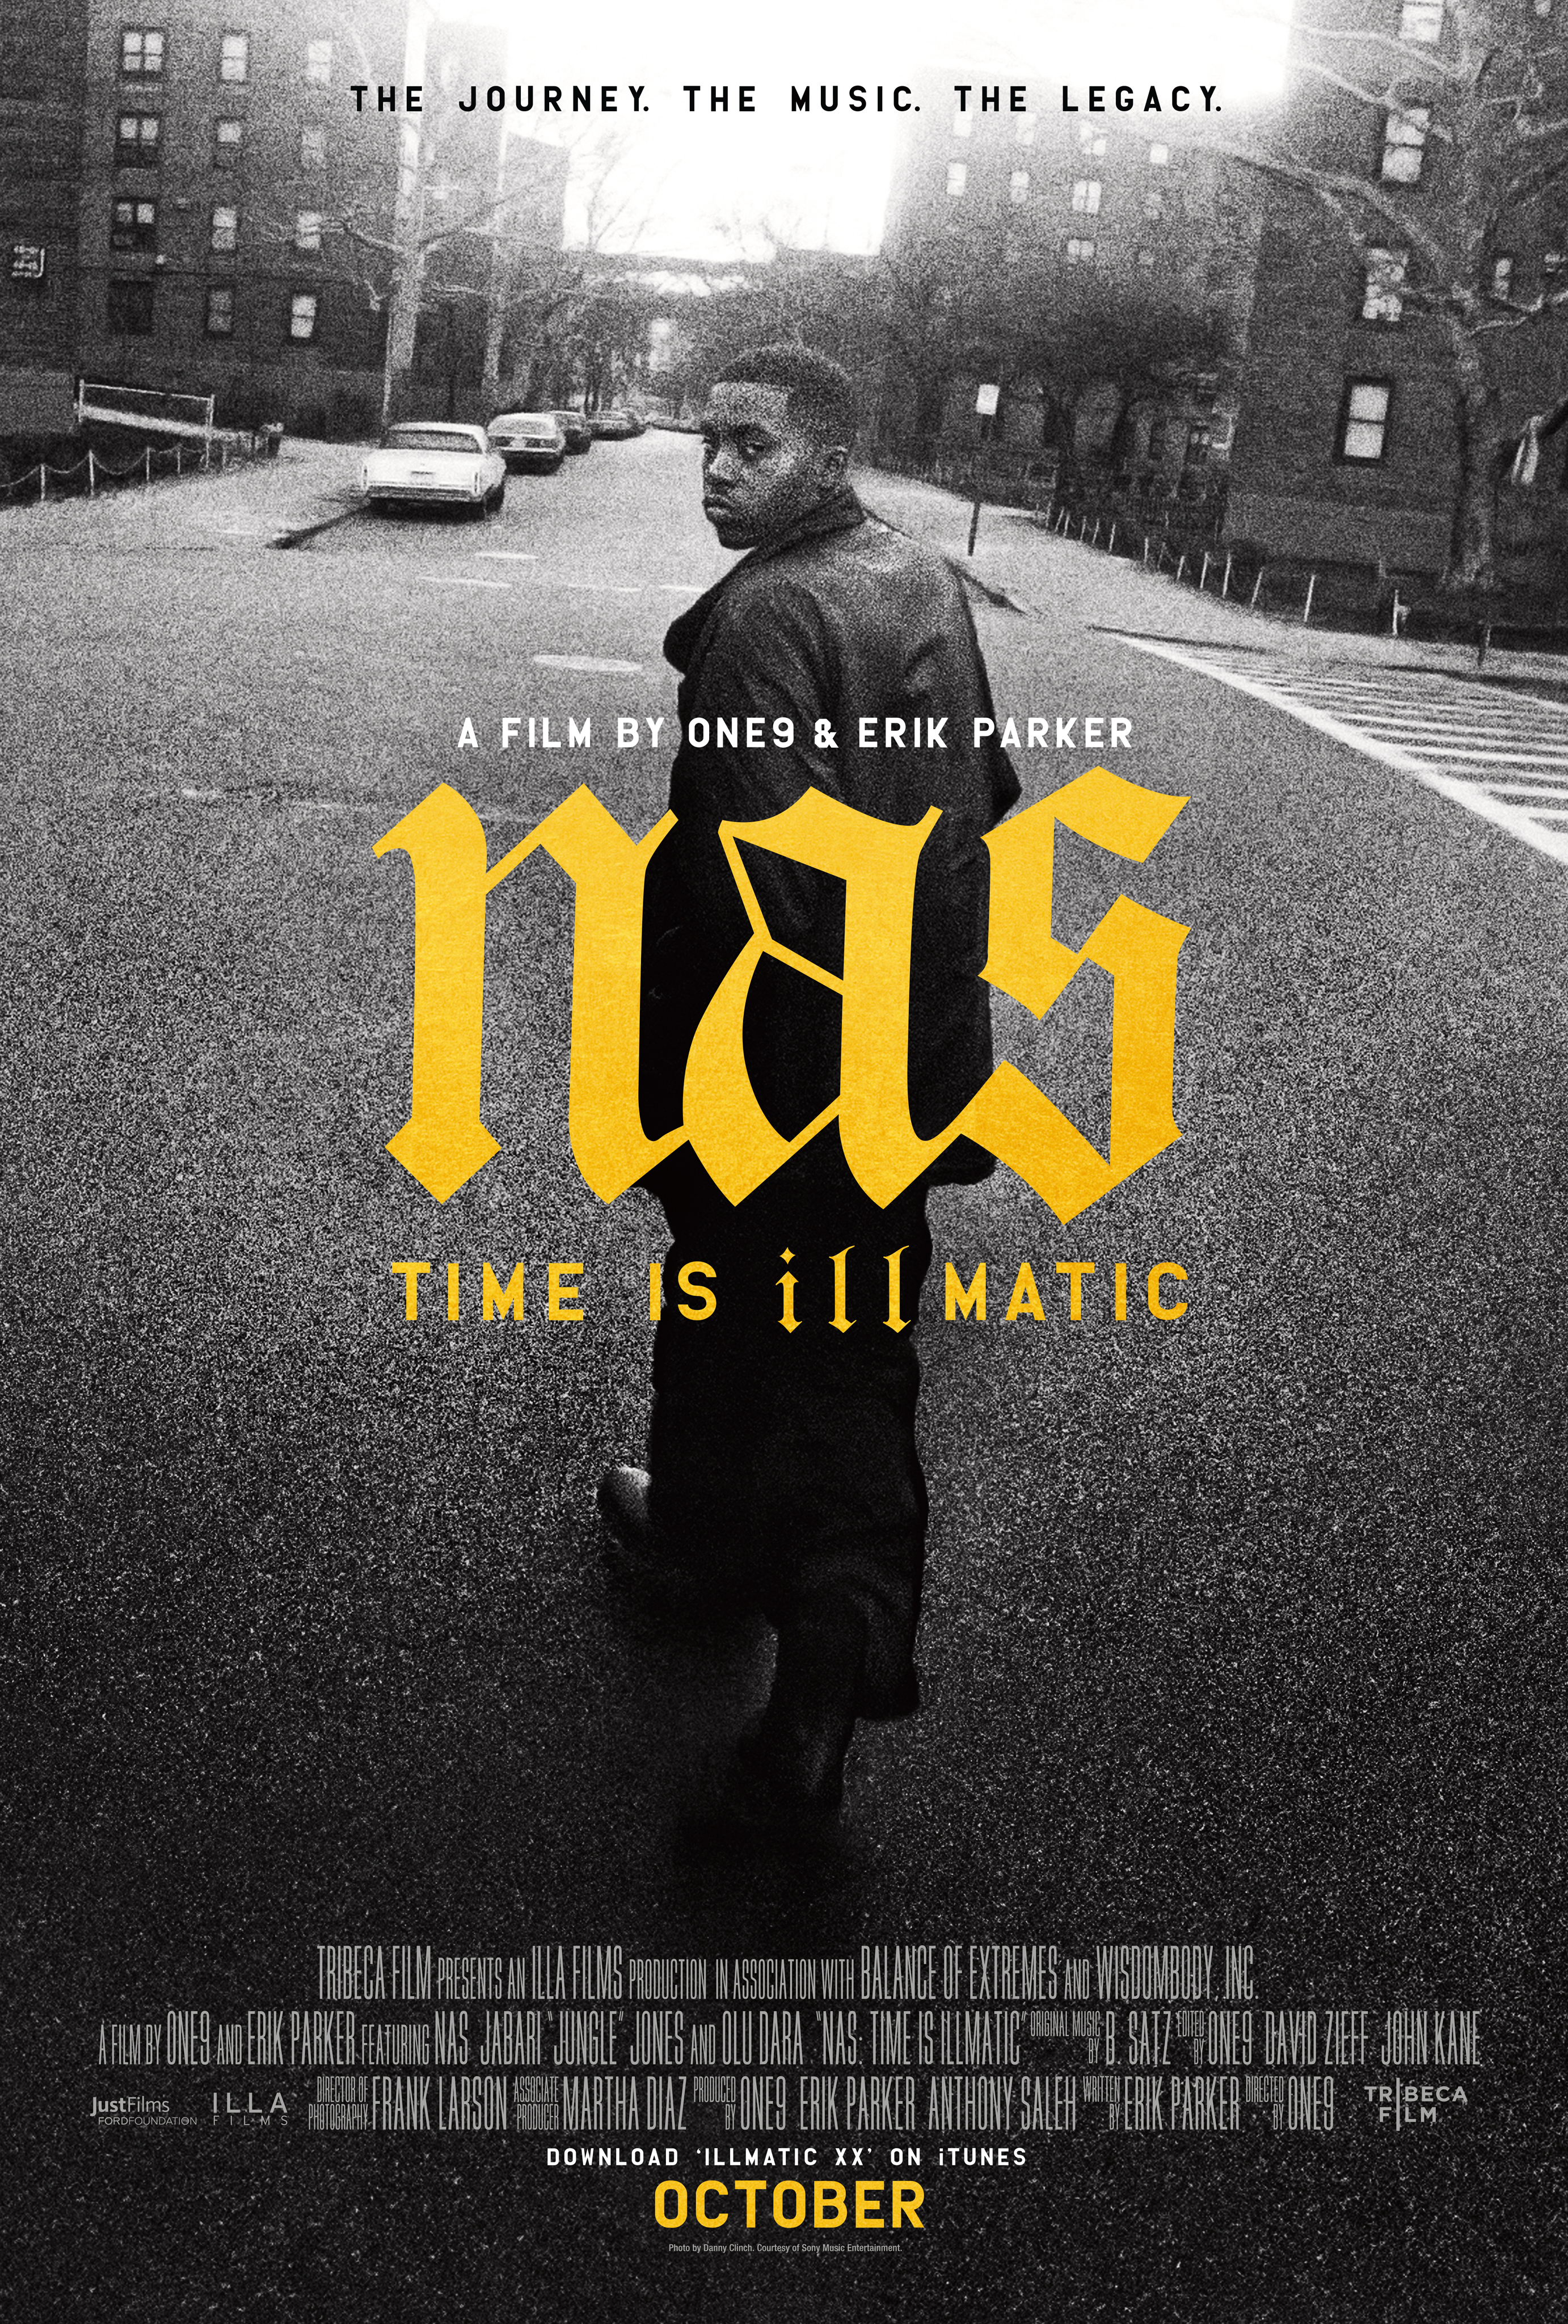 Theater Thursday: "Nas: Time Is Illmatic"